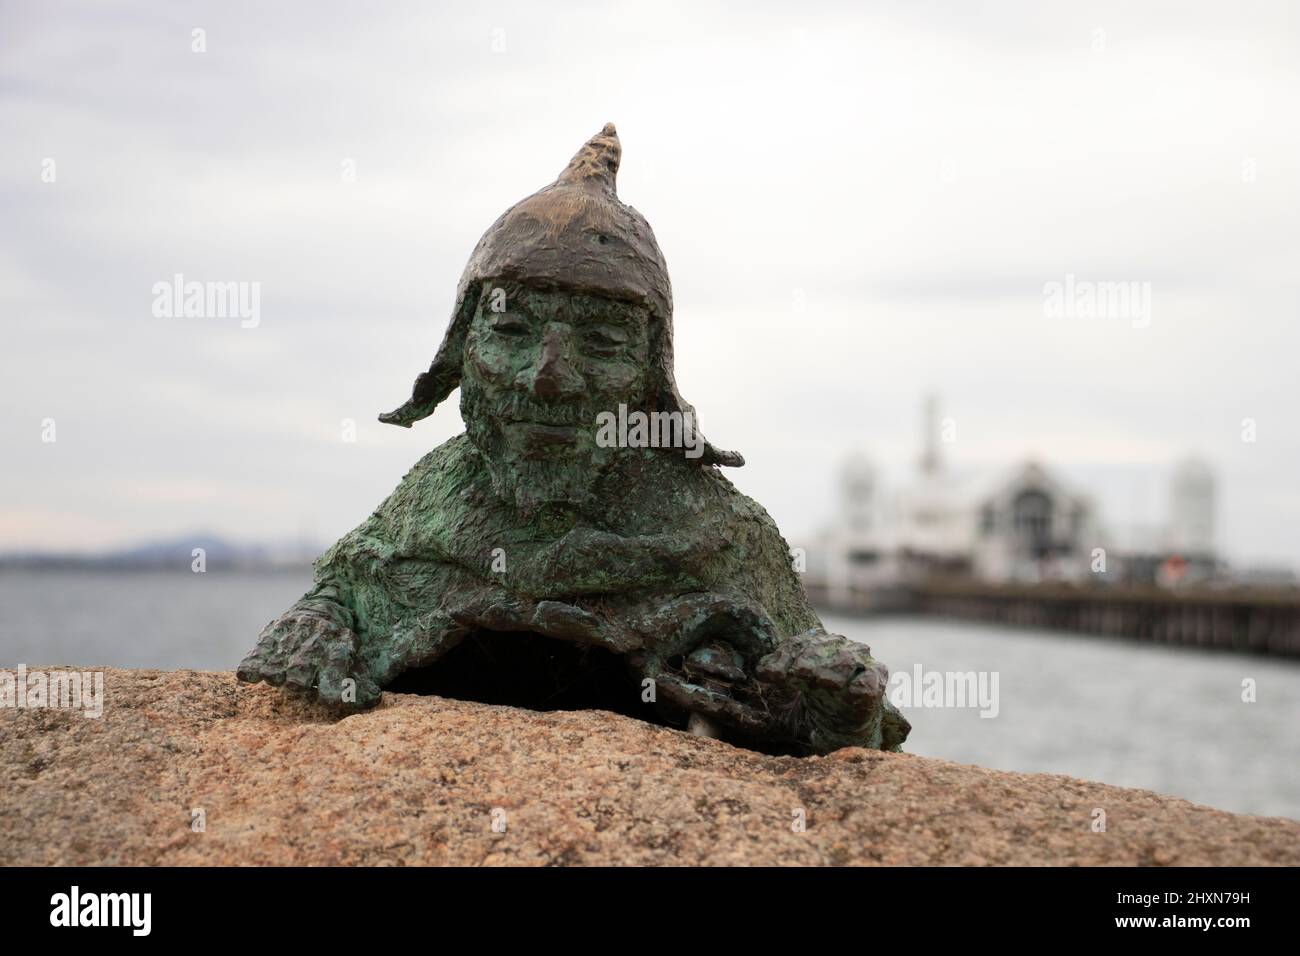 Bronze statue of a fictitious character looking over the top of a large rock Stock Photo